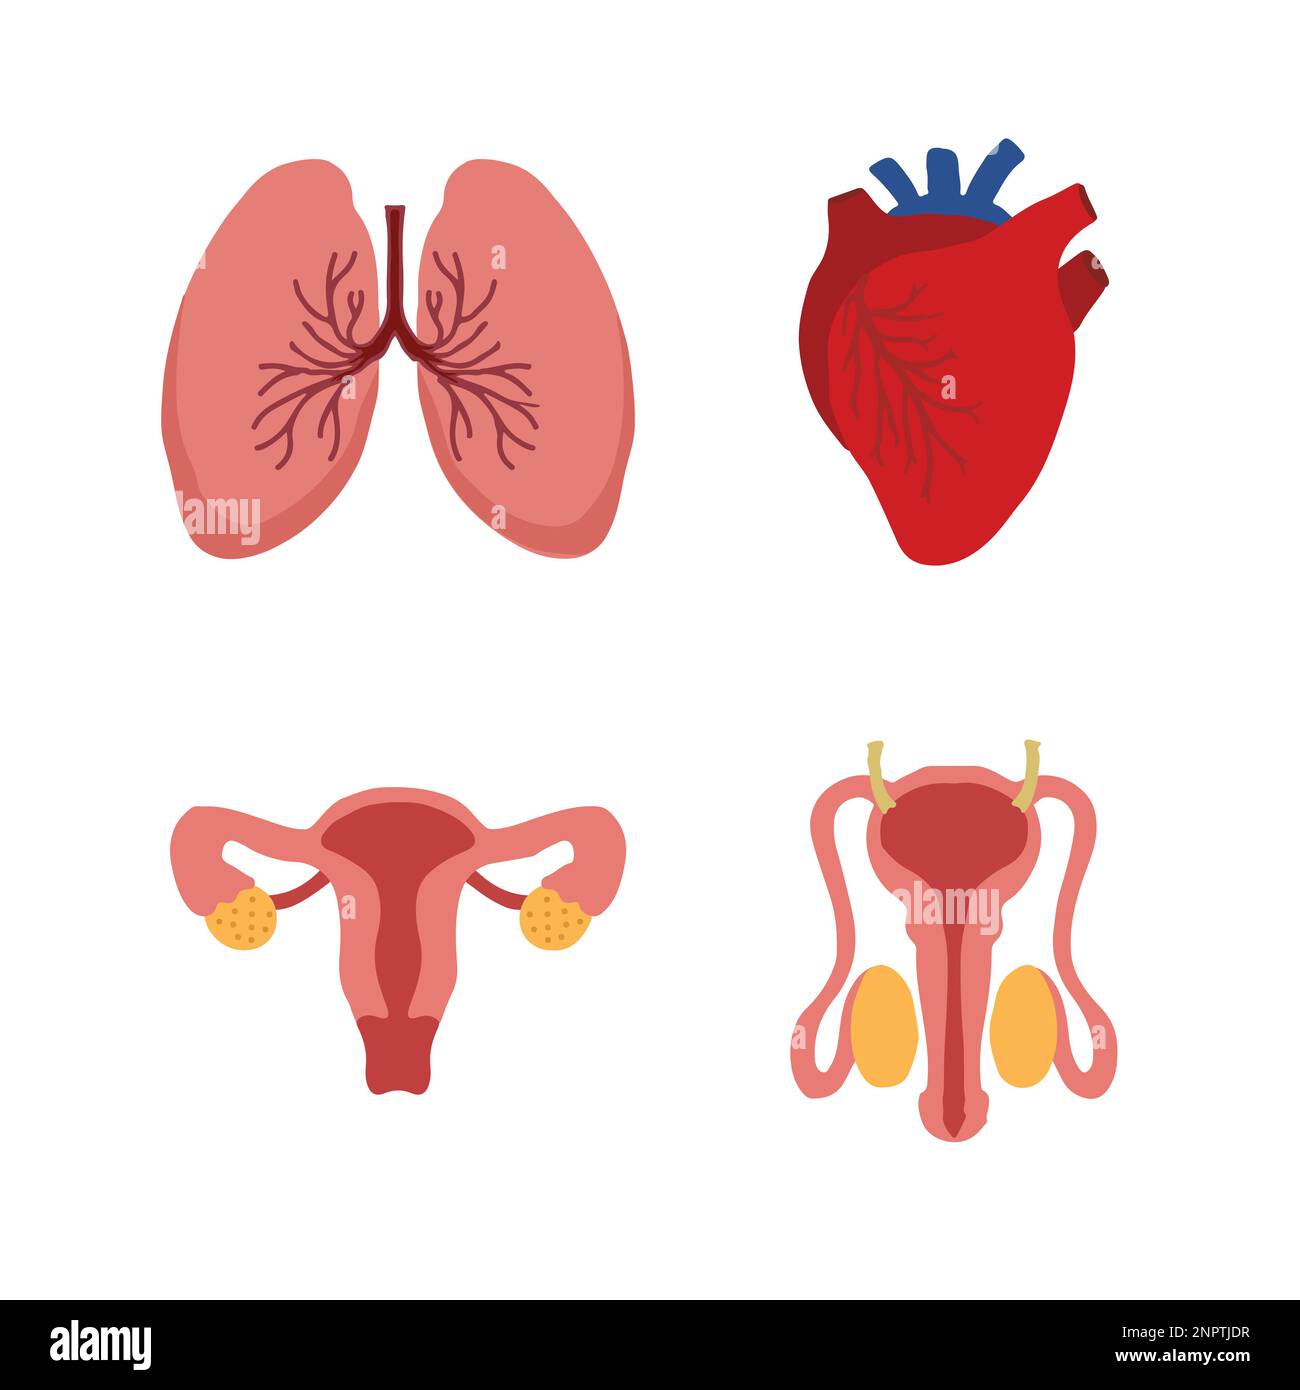 Human Internal organs, cartoon anatomy body parts, heart and lungs, male and female reproductive system, vector illustration. Stock Vector